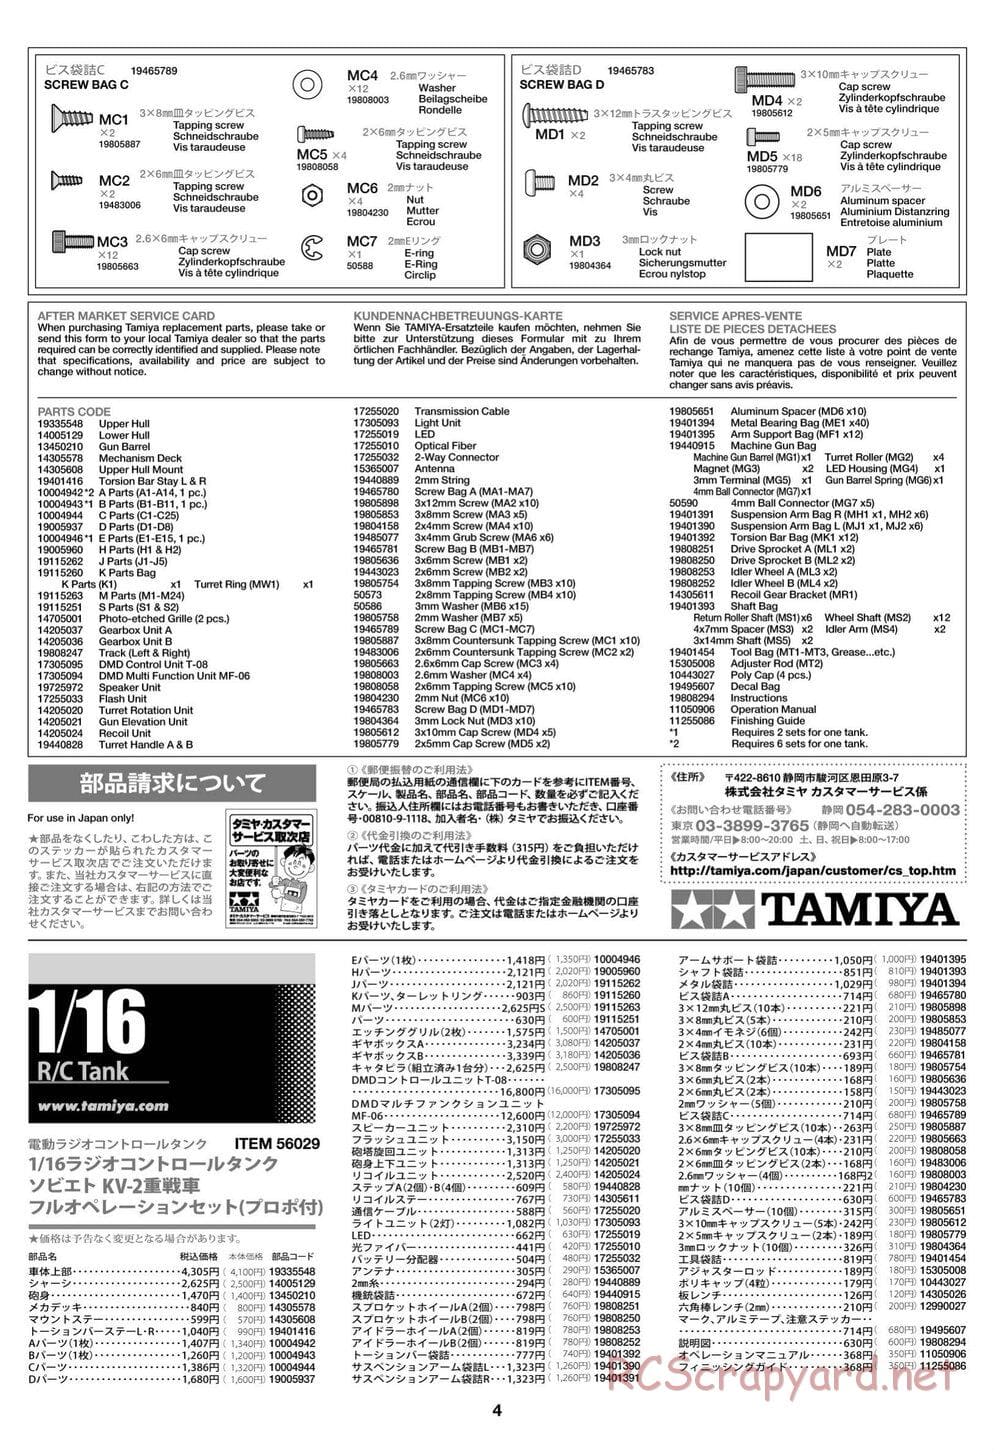 Tamiya - Russian Heavy Tank KV-2 Gigant - 1/16 Scale Chassis - Manual - Page 28